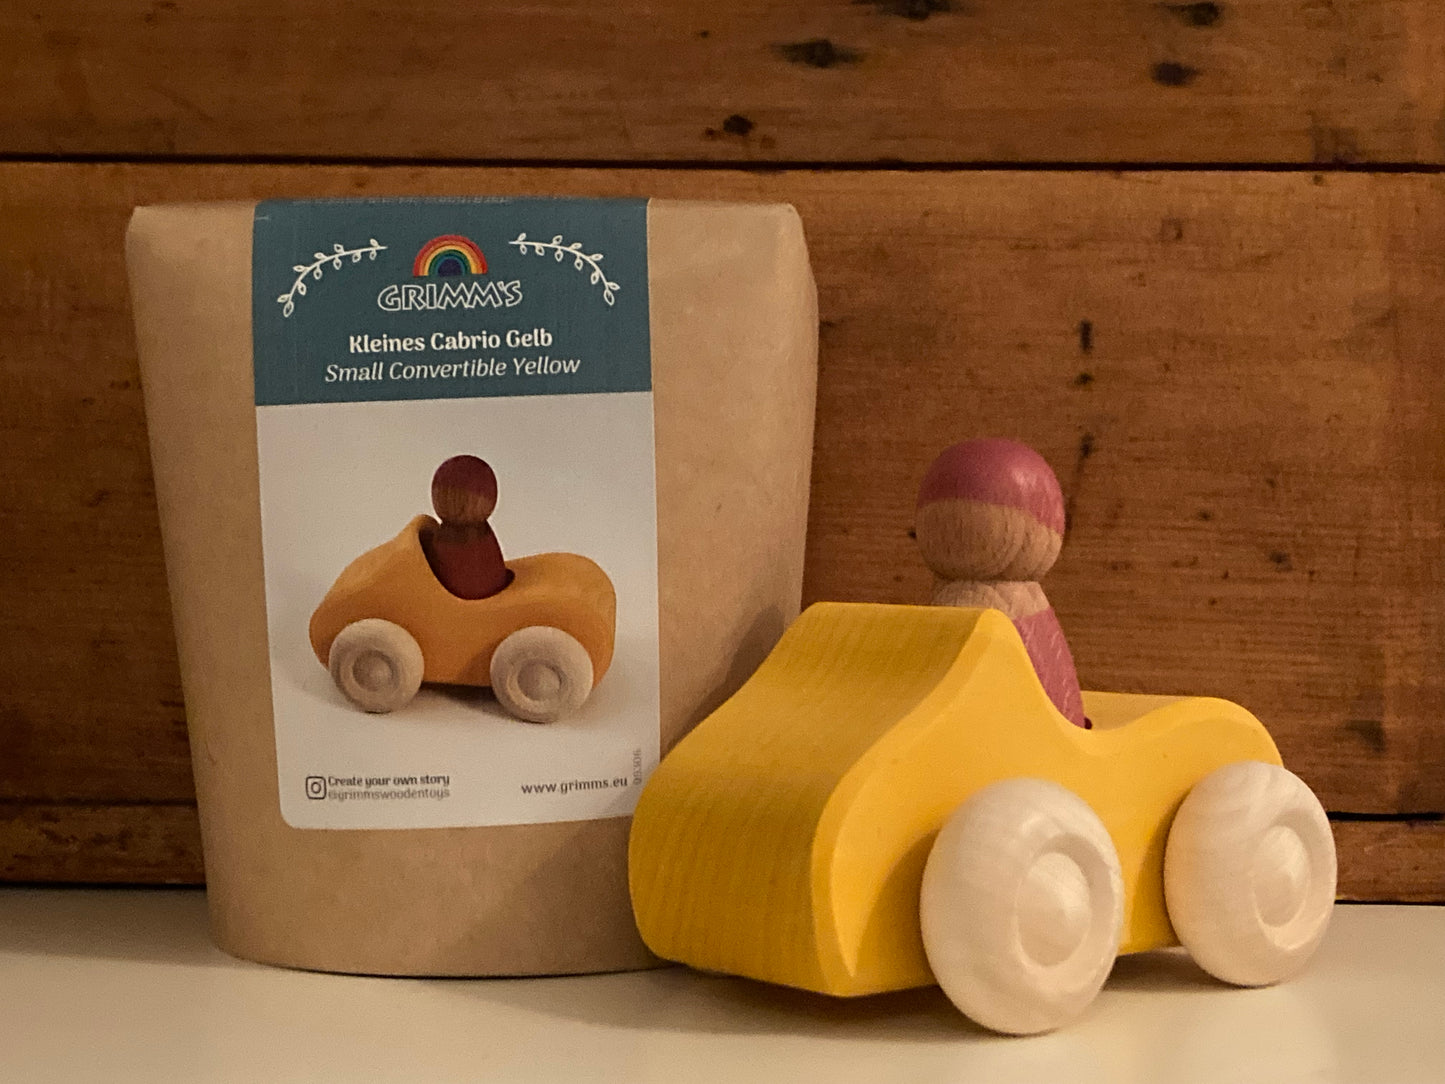 Wooden Toy Car - YELLOW CONVERTIBLE with driver